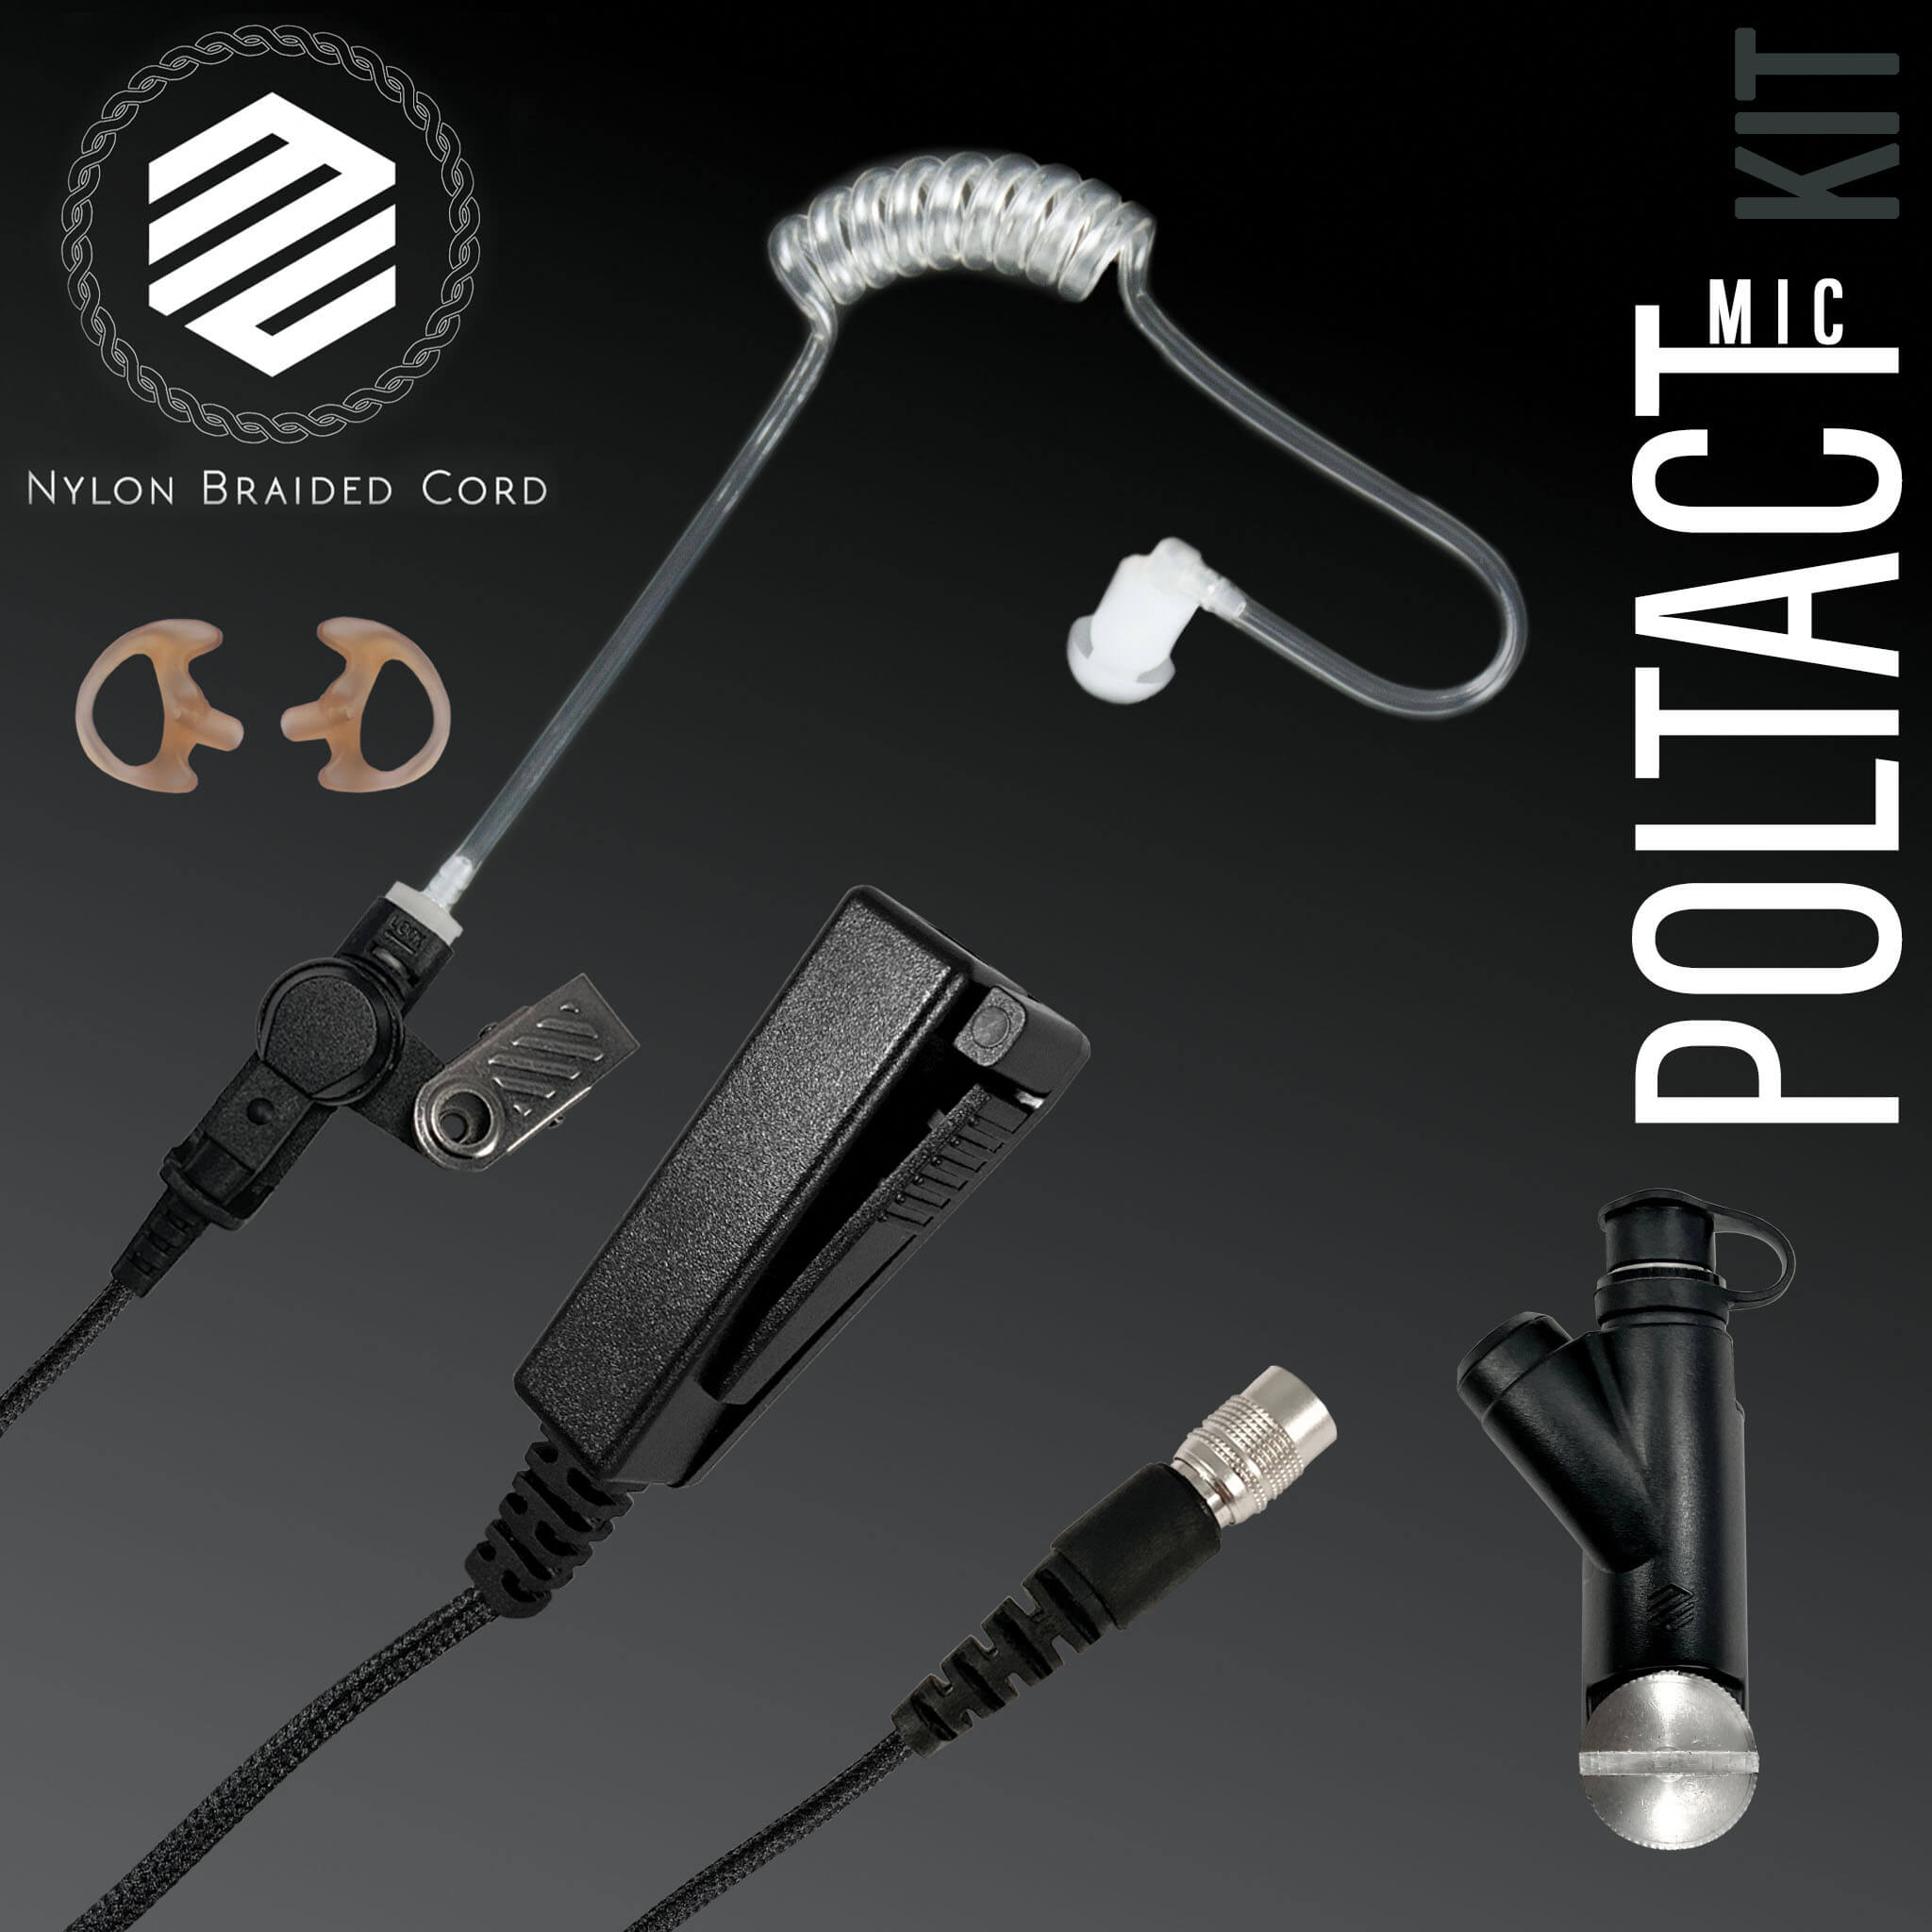 PolTact Mic Kit: PTM29RR - Guaranteed to work w/: Harris XG-100, XG-100P, XL-185, XL-185P, XL-185Pi, XL-200, XL-200P, XL-200Pi